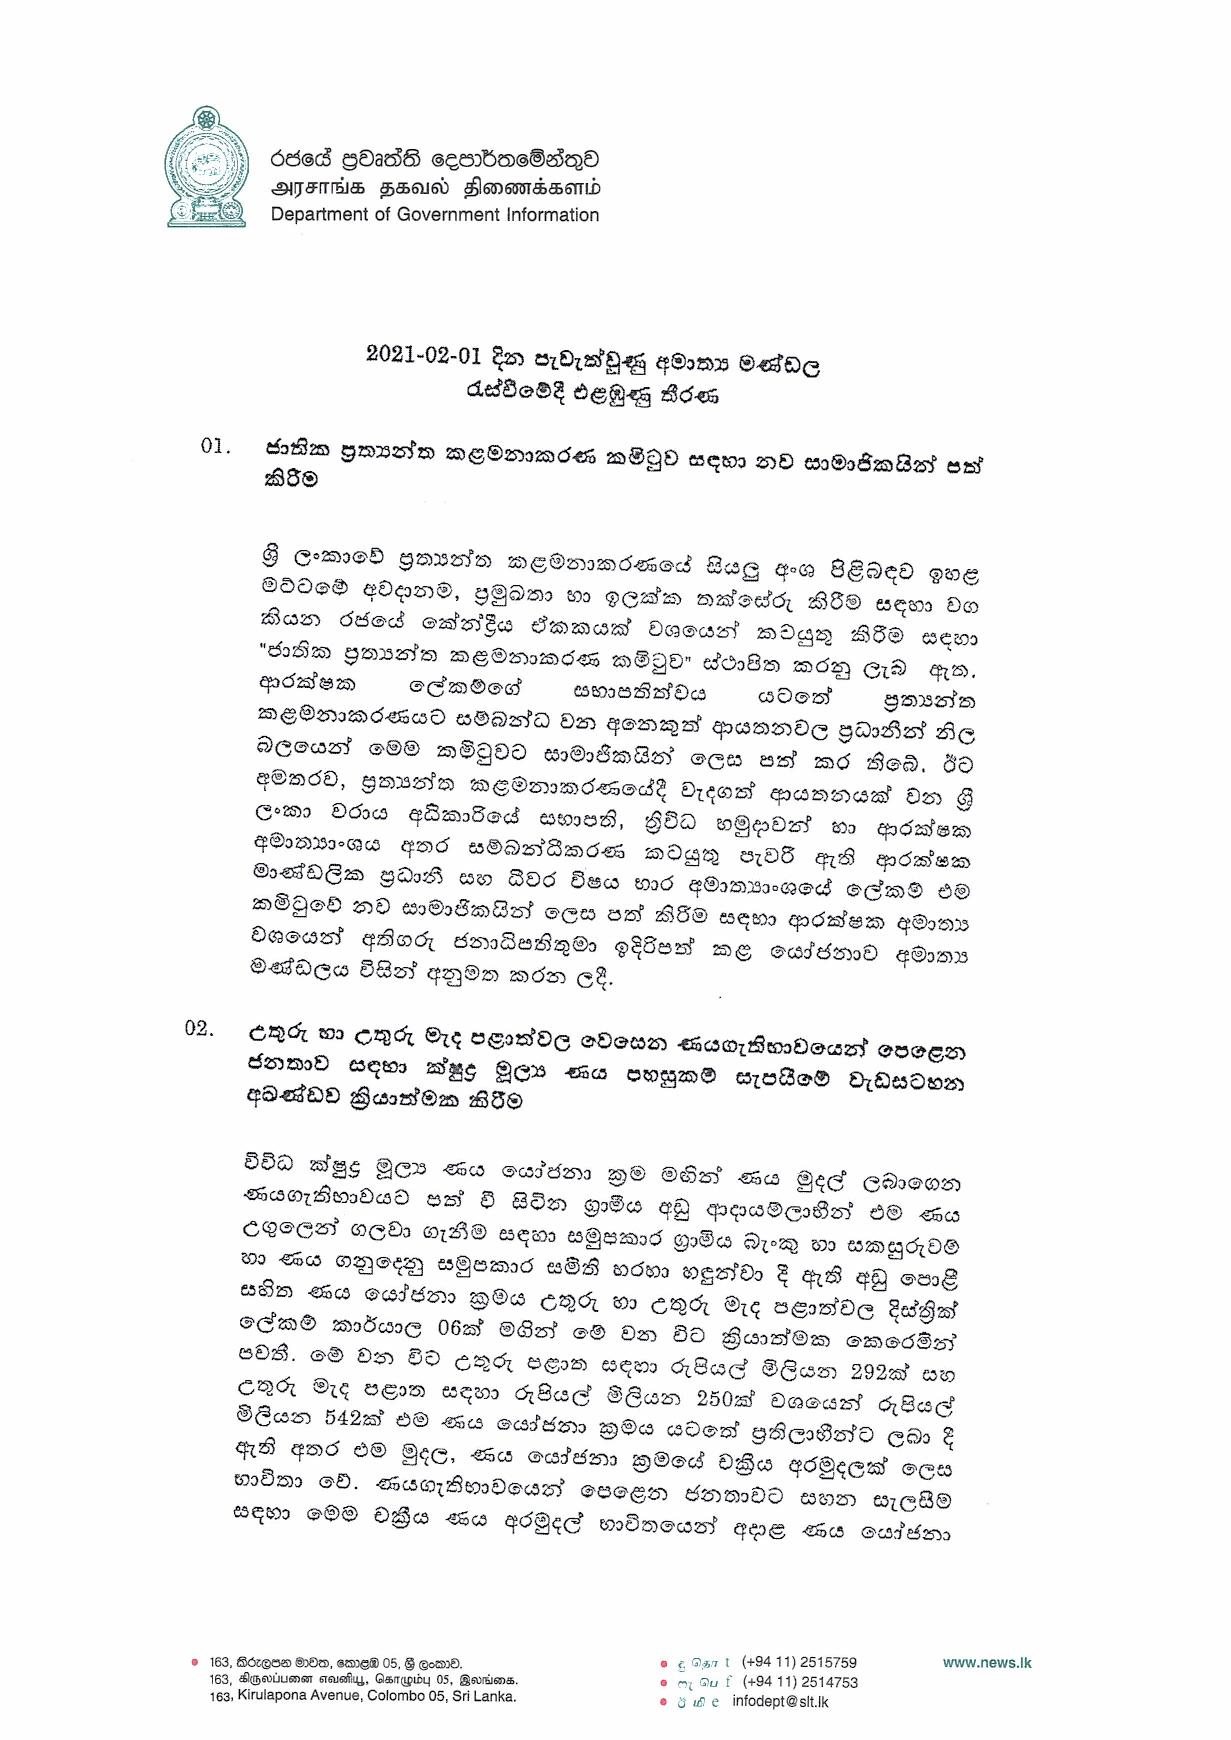 Cabinet Decision on 01.02.2021 page 001